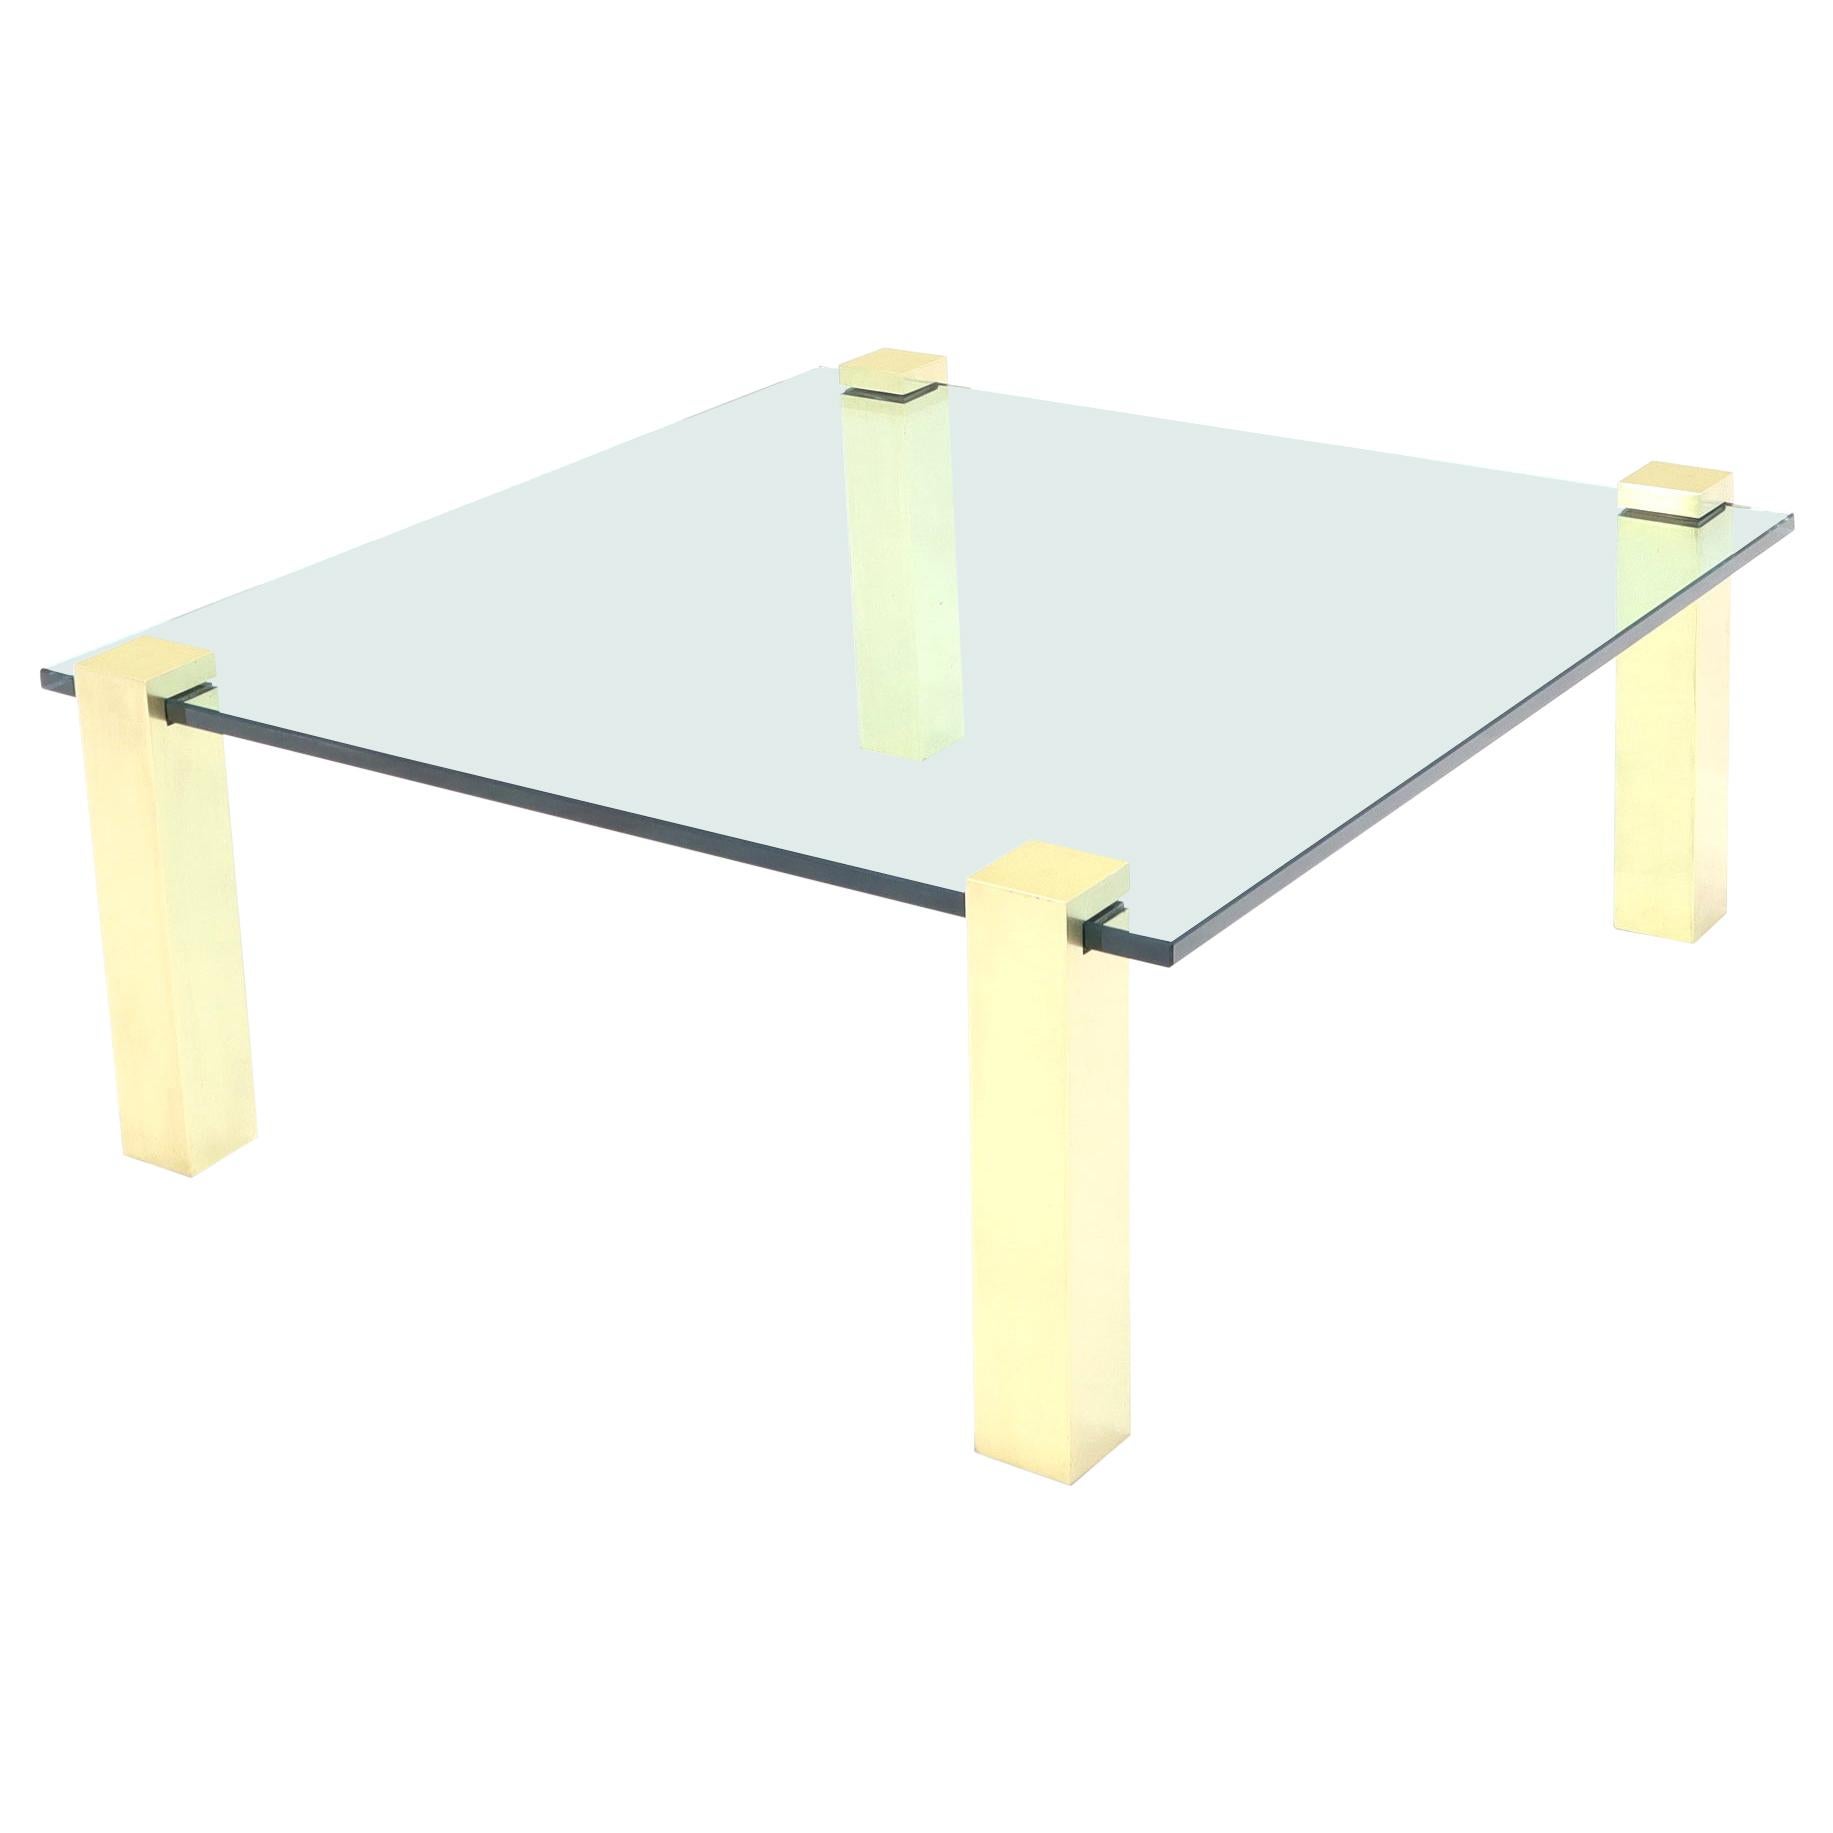 Solid Brass Square Posts Legs Glass Top Coffee Table